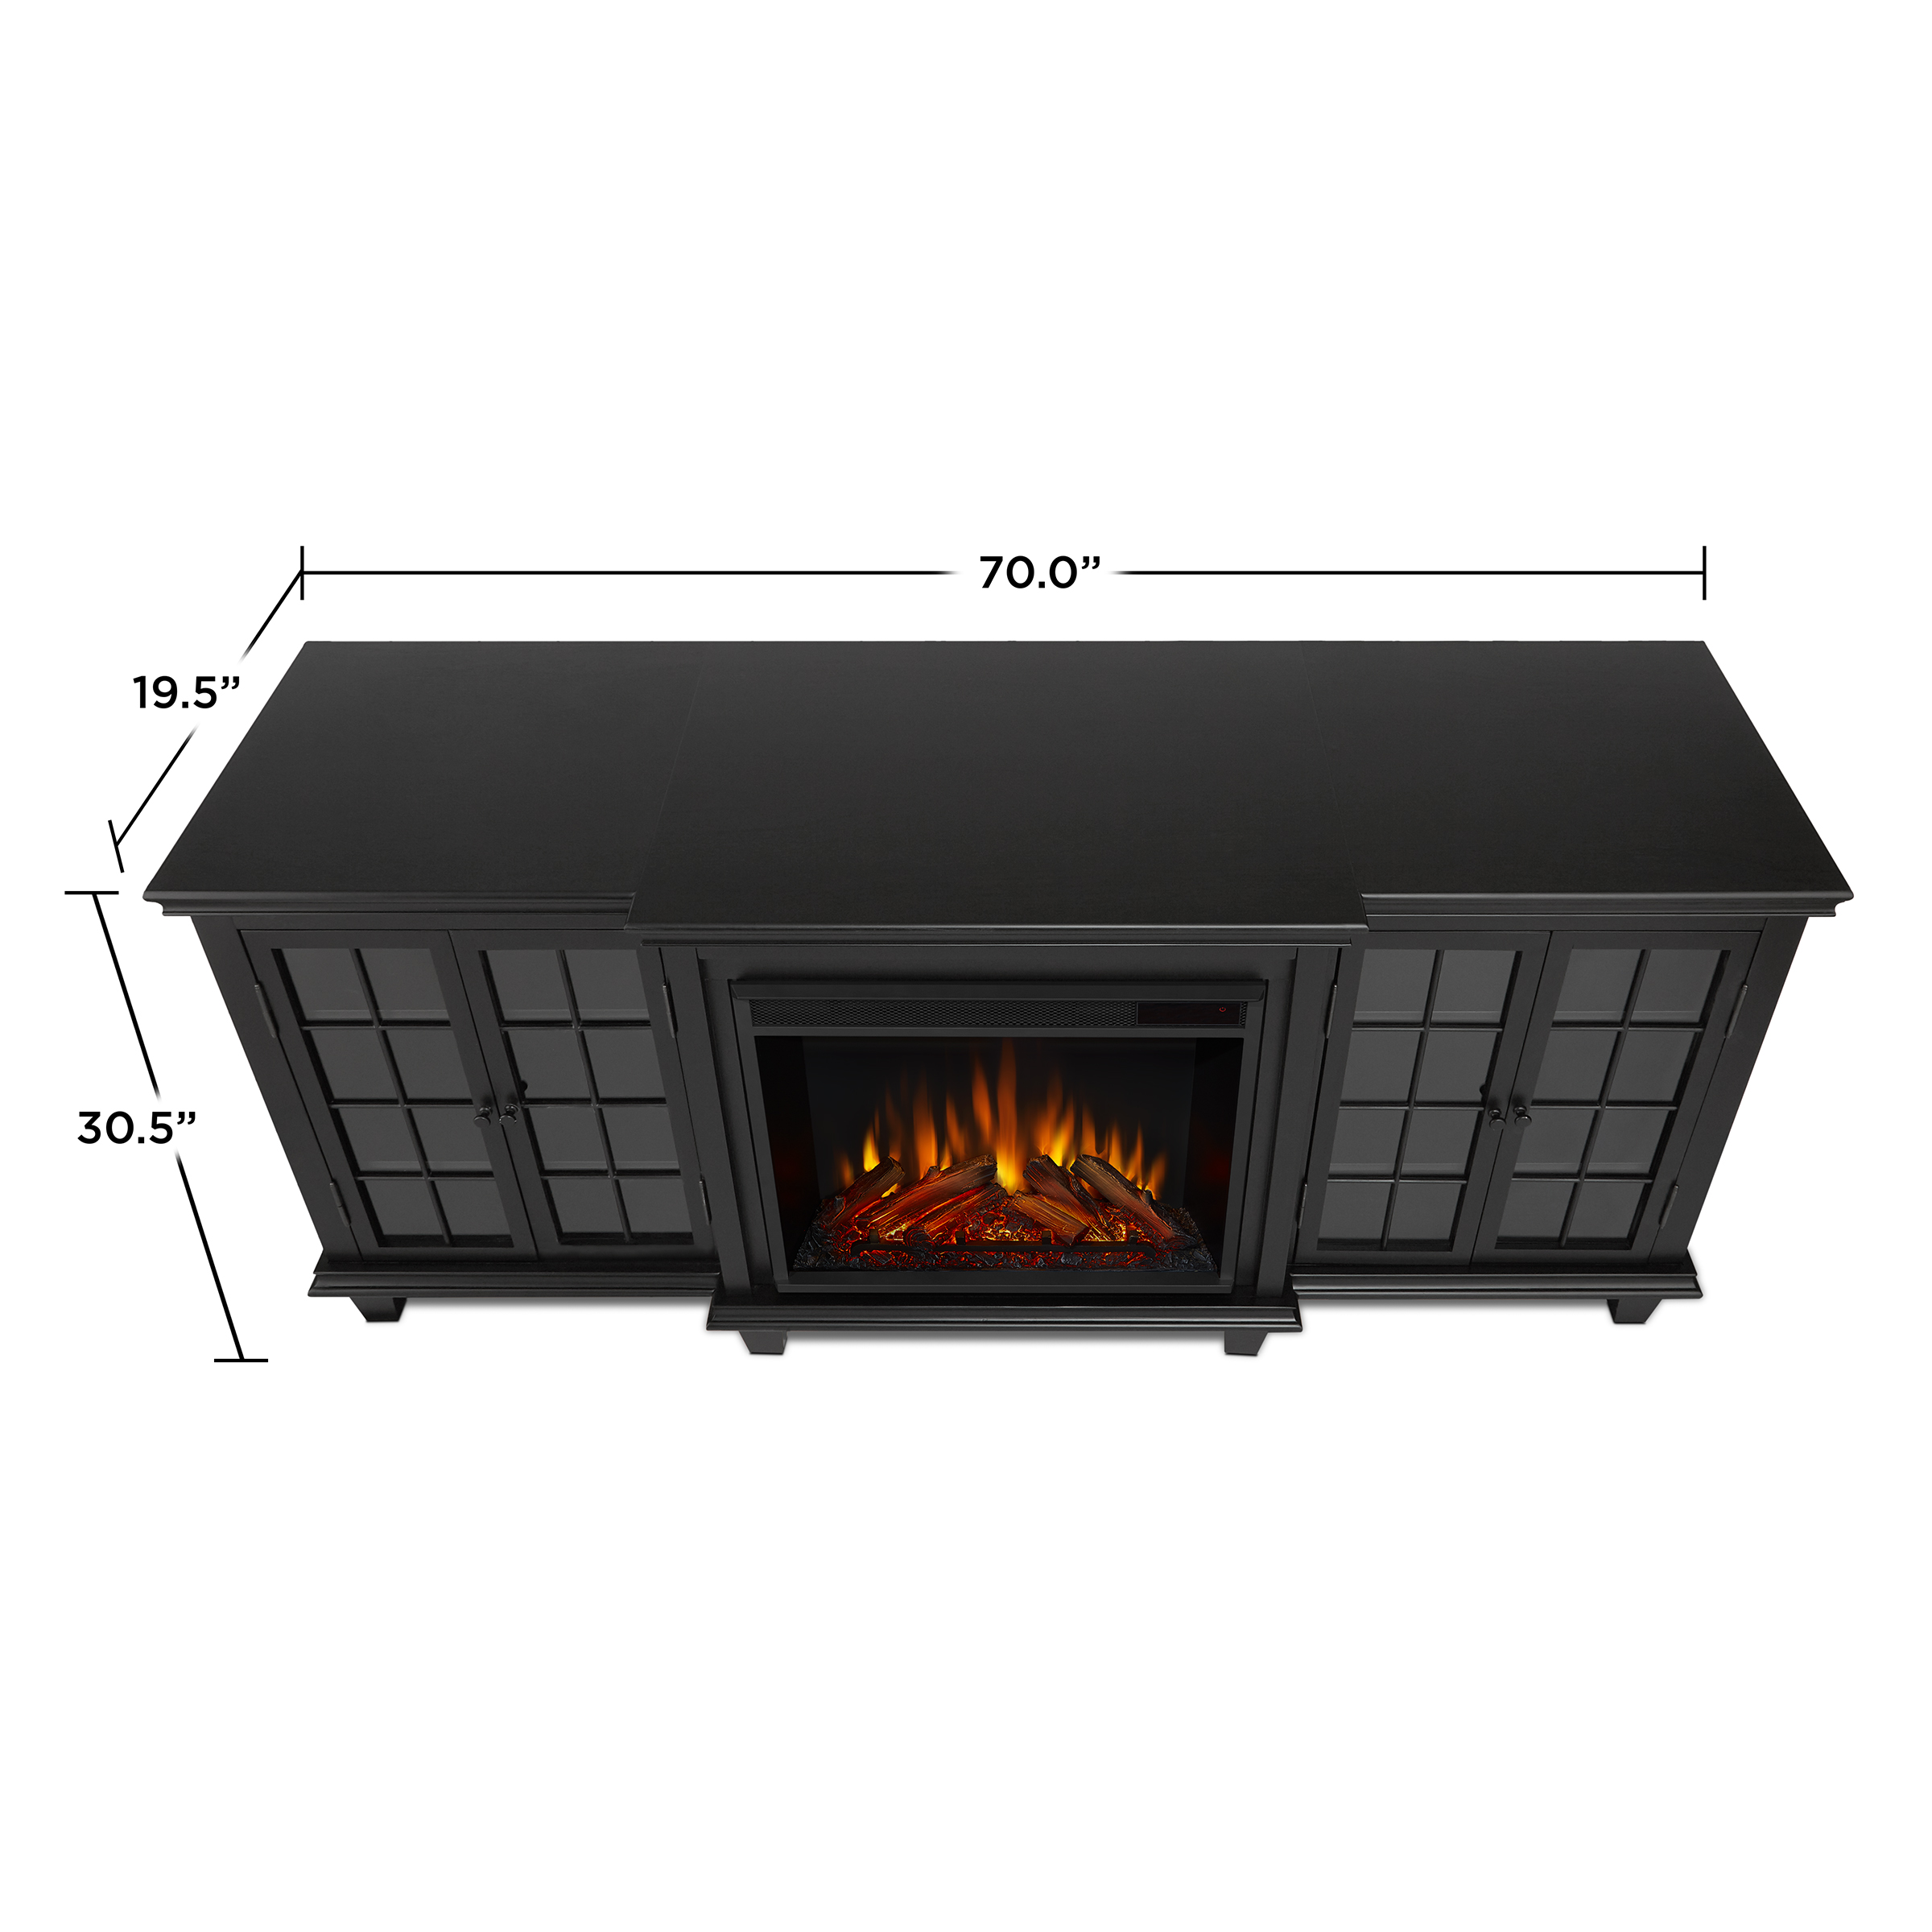 Black Electric Fireplace Dimensions